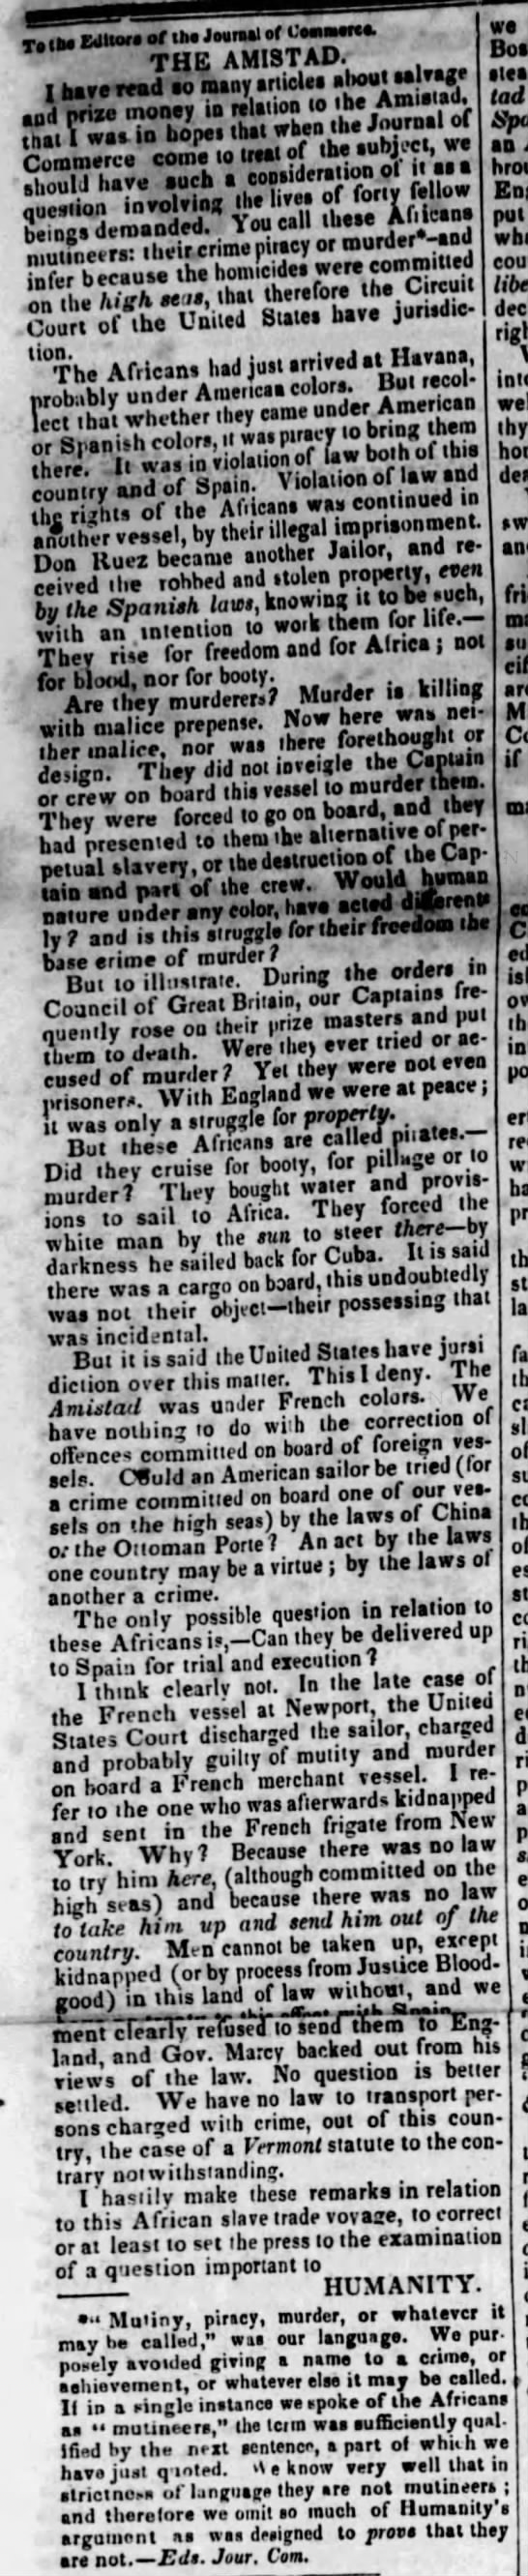 Letter to the editor arguing Africans on the Amistad were not murderers or pirates - 